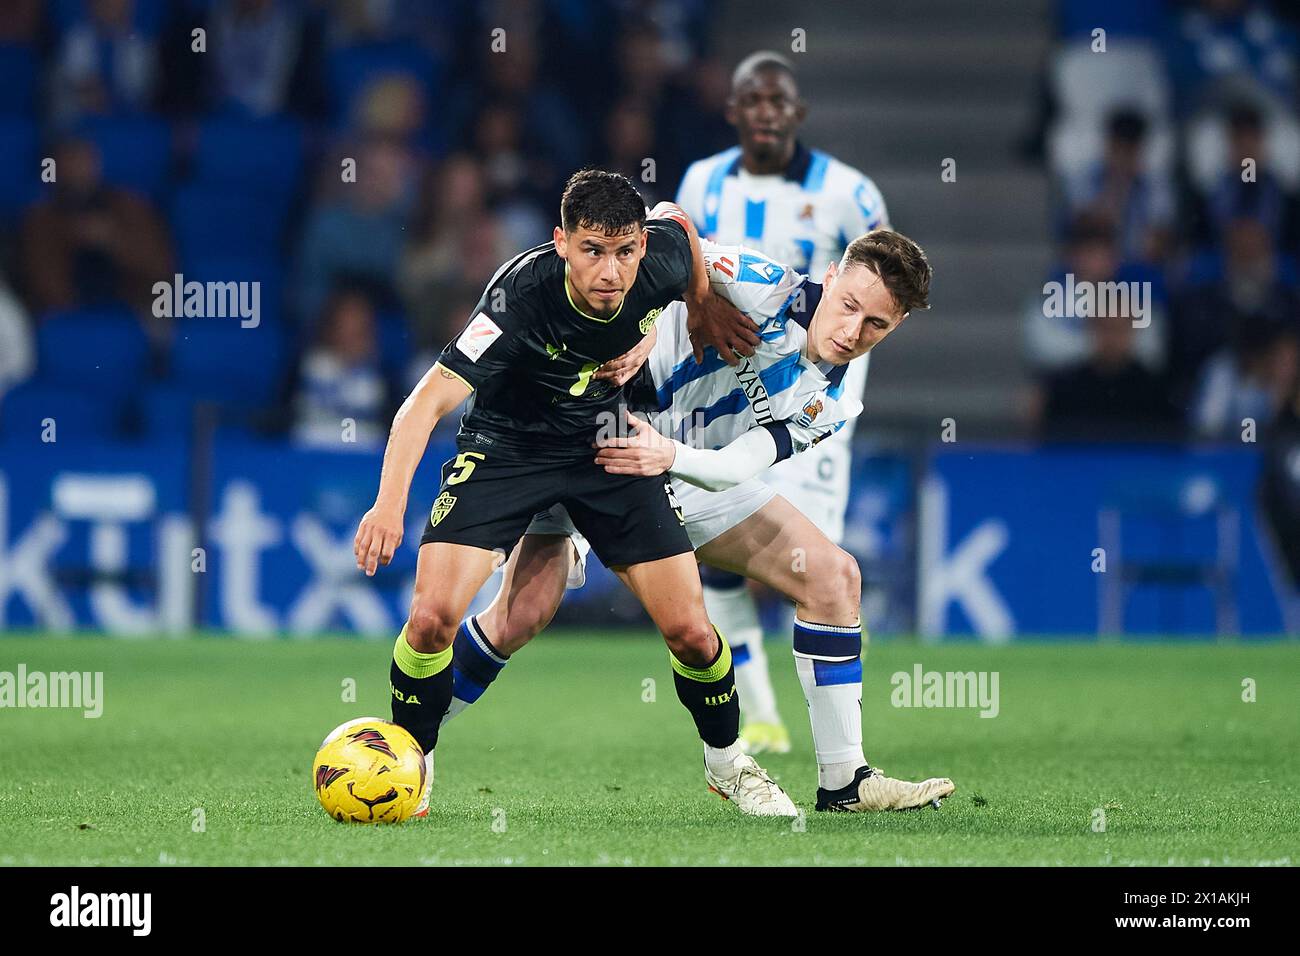 Lucas Robertone of UD Almeria compete for the ball with Benat Turrientes of Real Sociedad during the LaLiga EA Sports match between Real Sociedad and Stock Photo